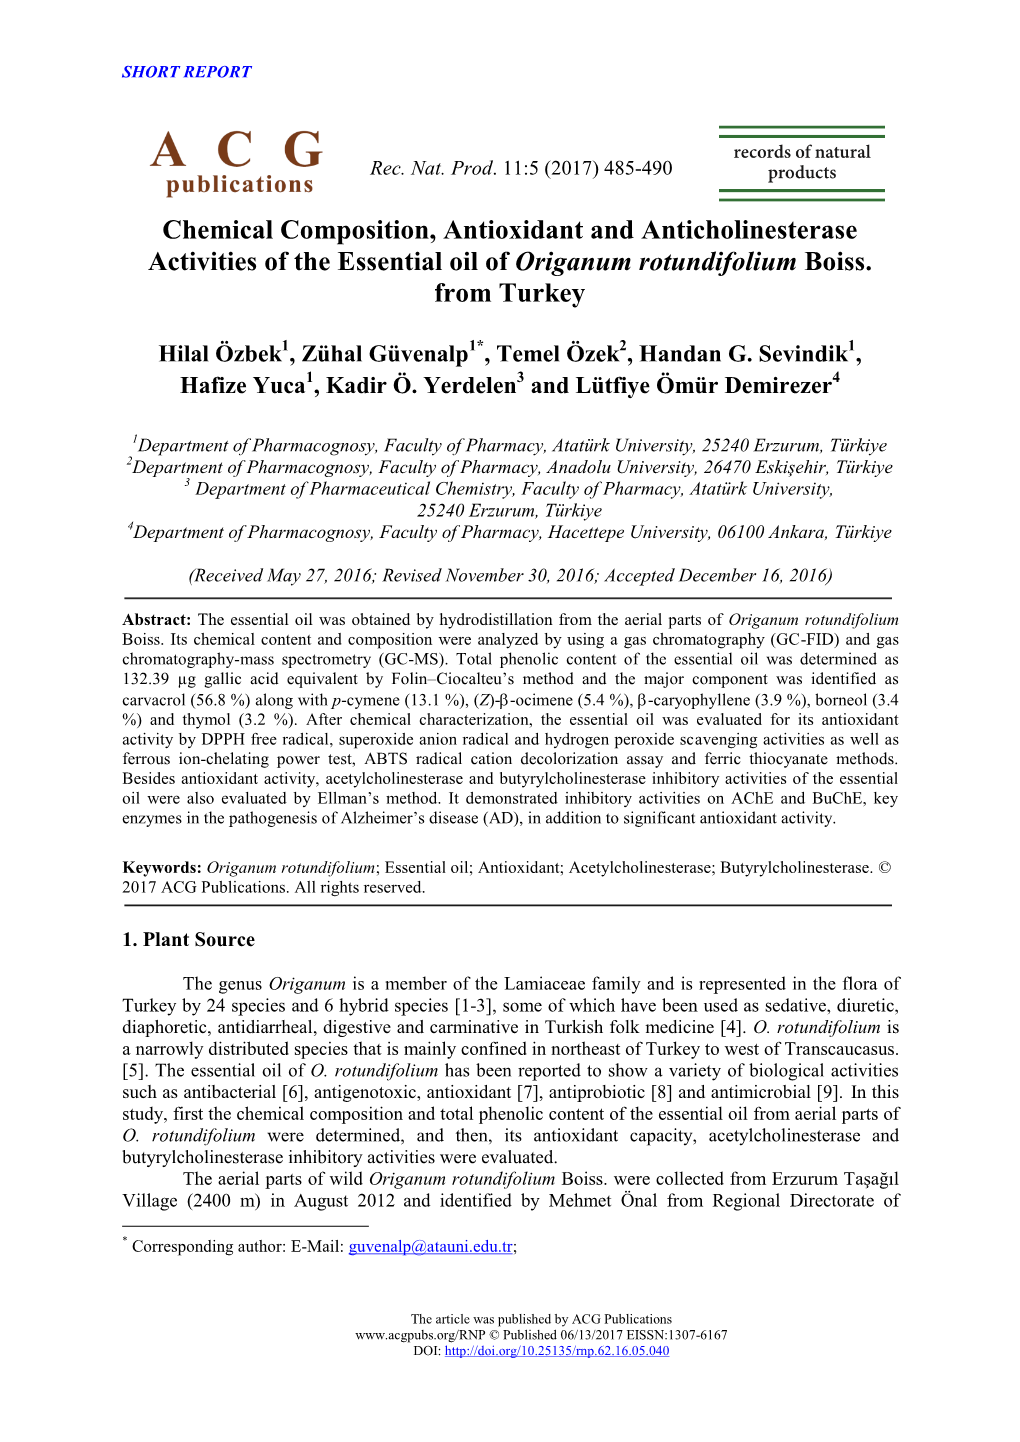 Chemical Composition, Antioxidant and Anticholinesterase Activities of the Essential Oil of Origanum Rotundifolium Boiss. from Turkey